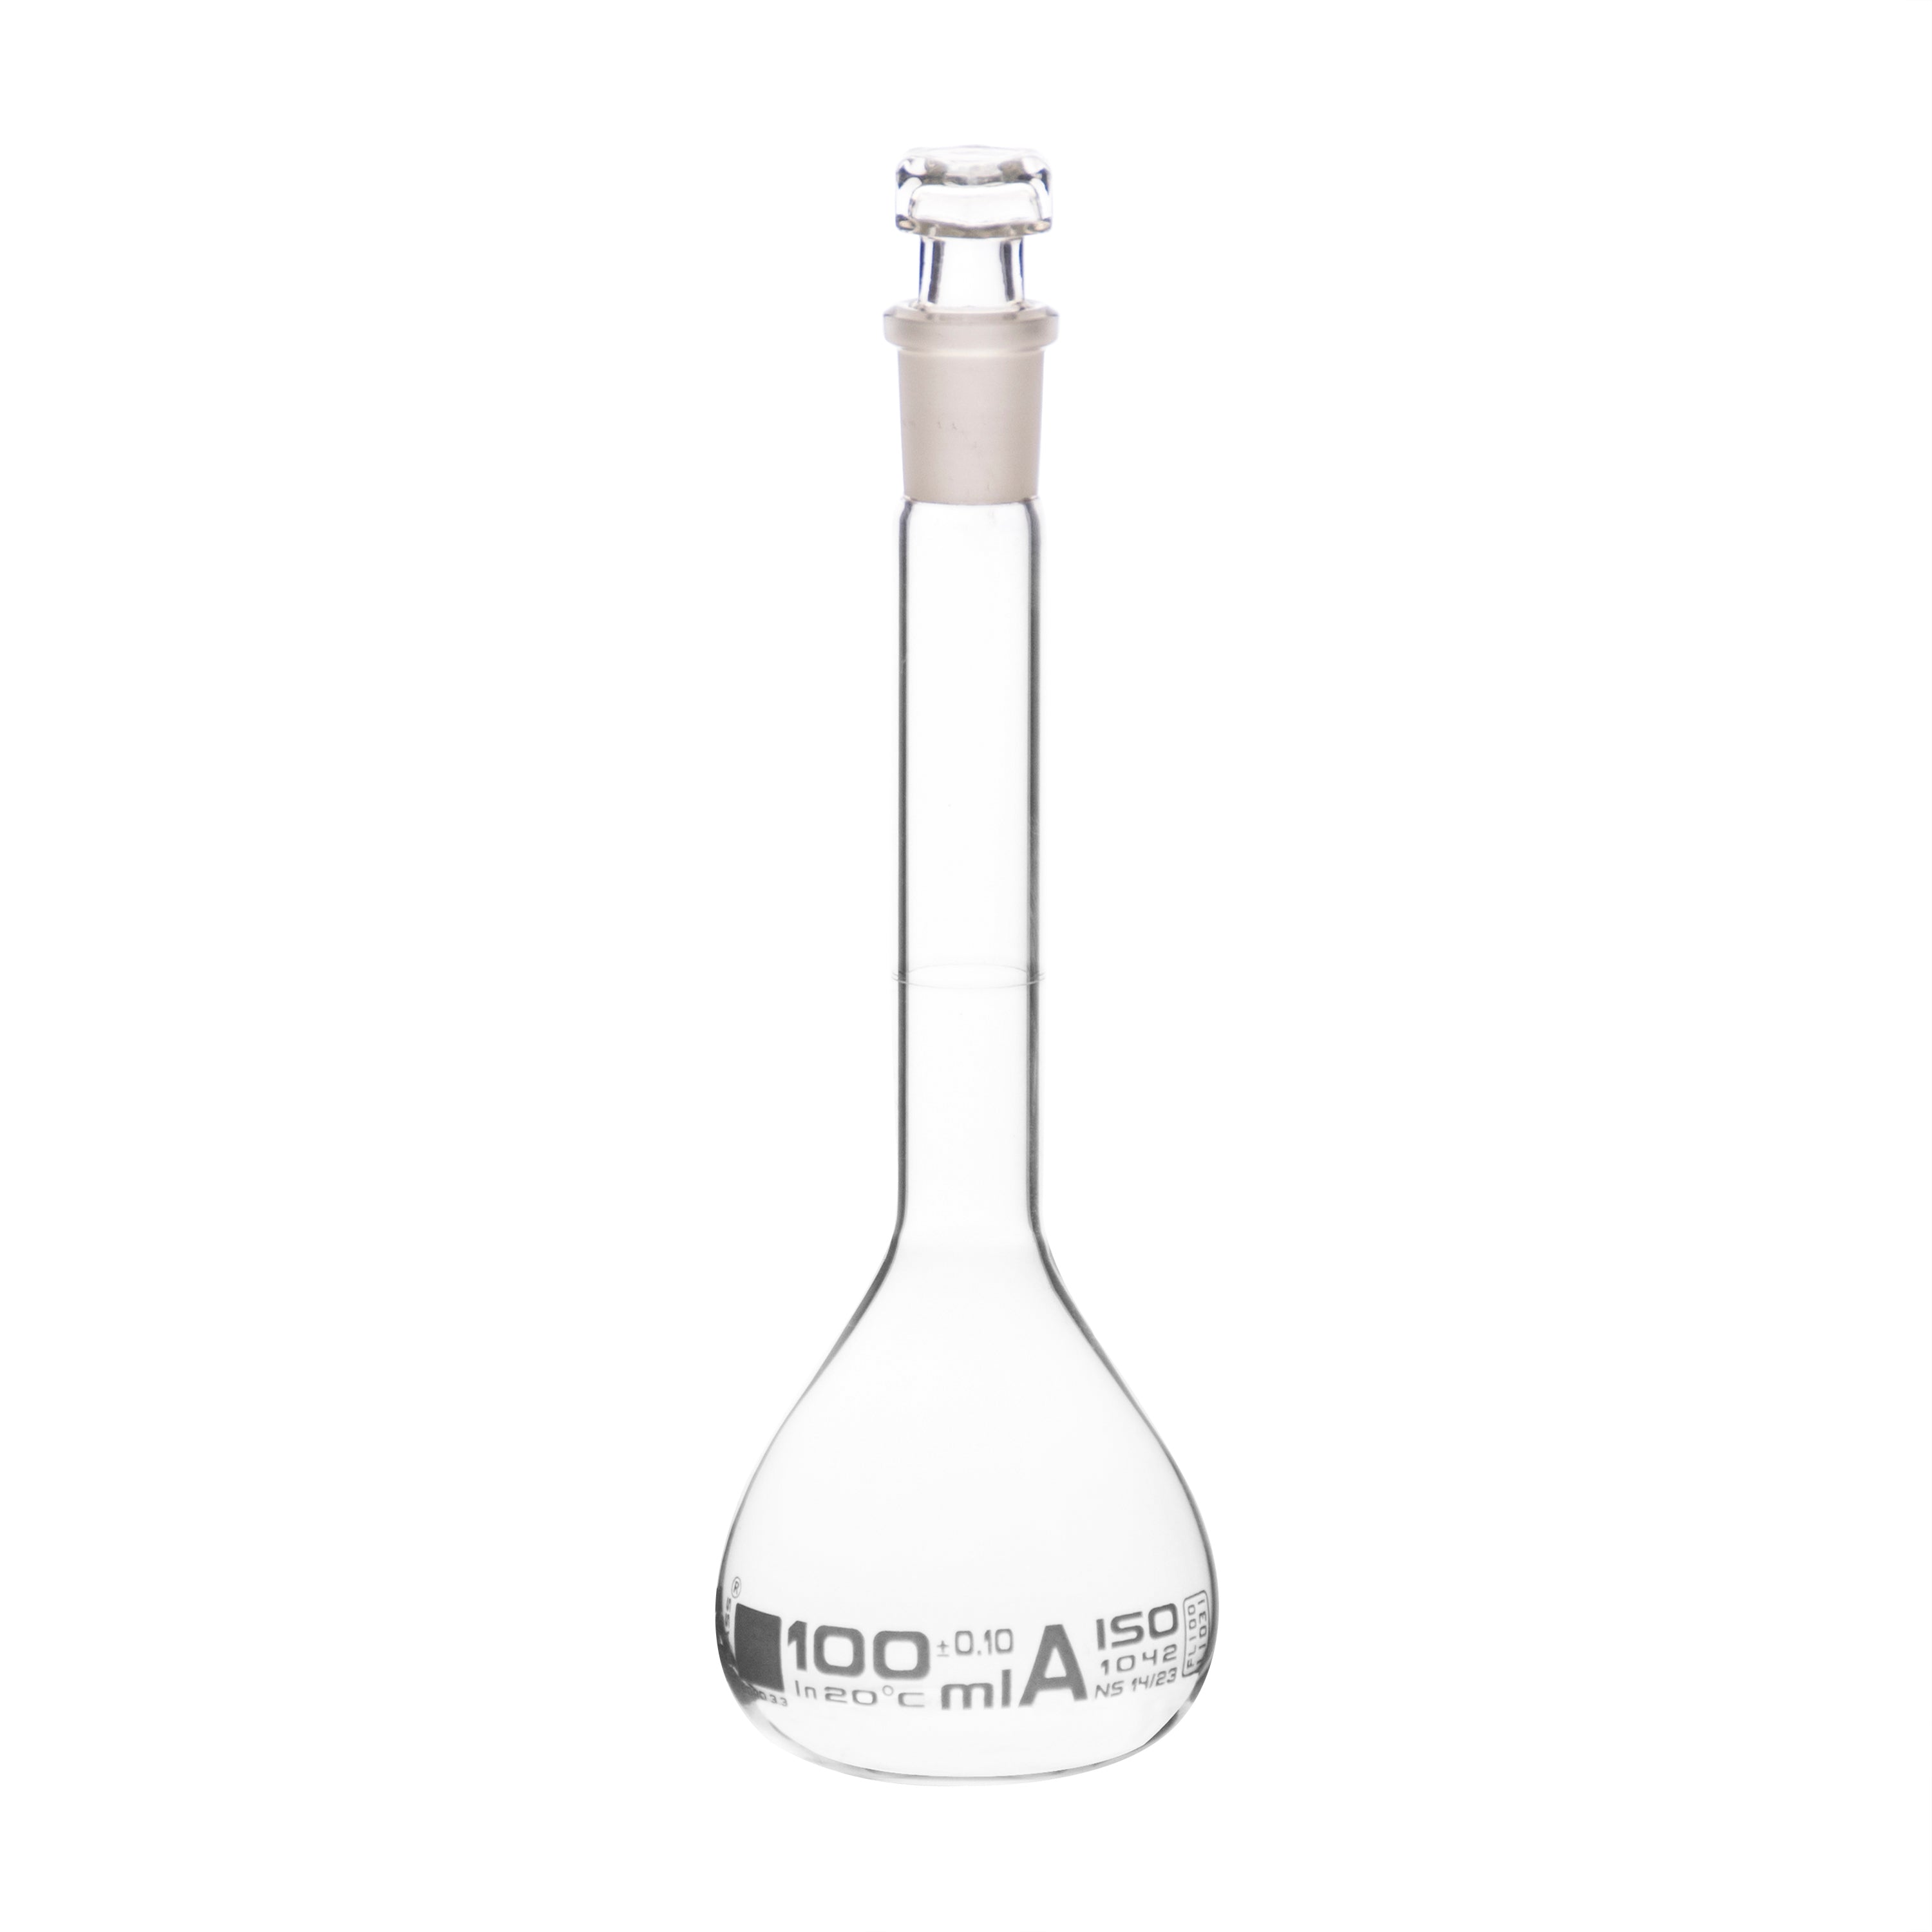 Borosilicate Volumetric Flask with Hollow Glass Stopper, 100ml, Class A, White Print, Autoclavable